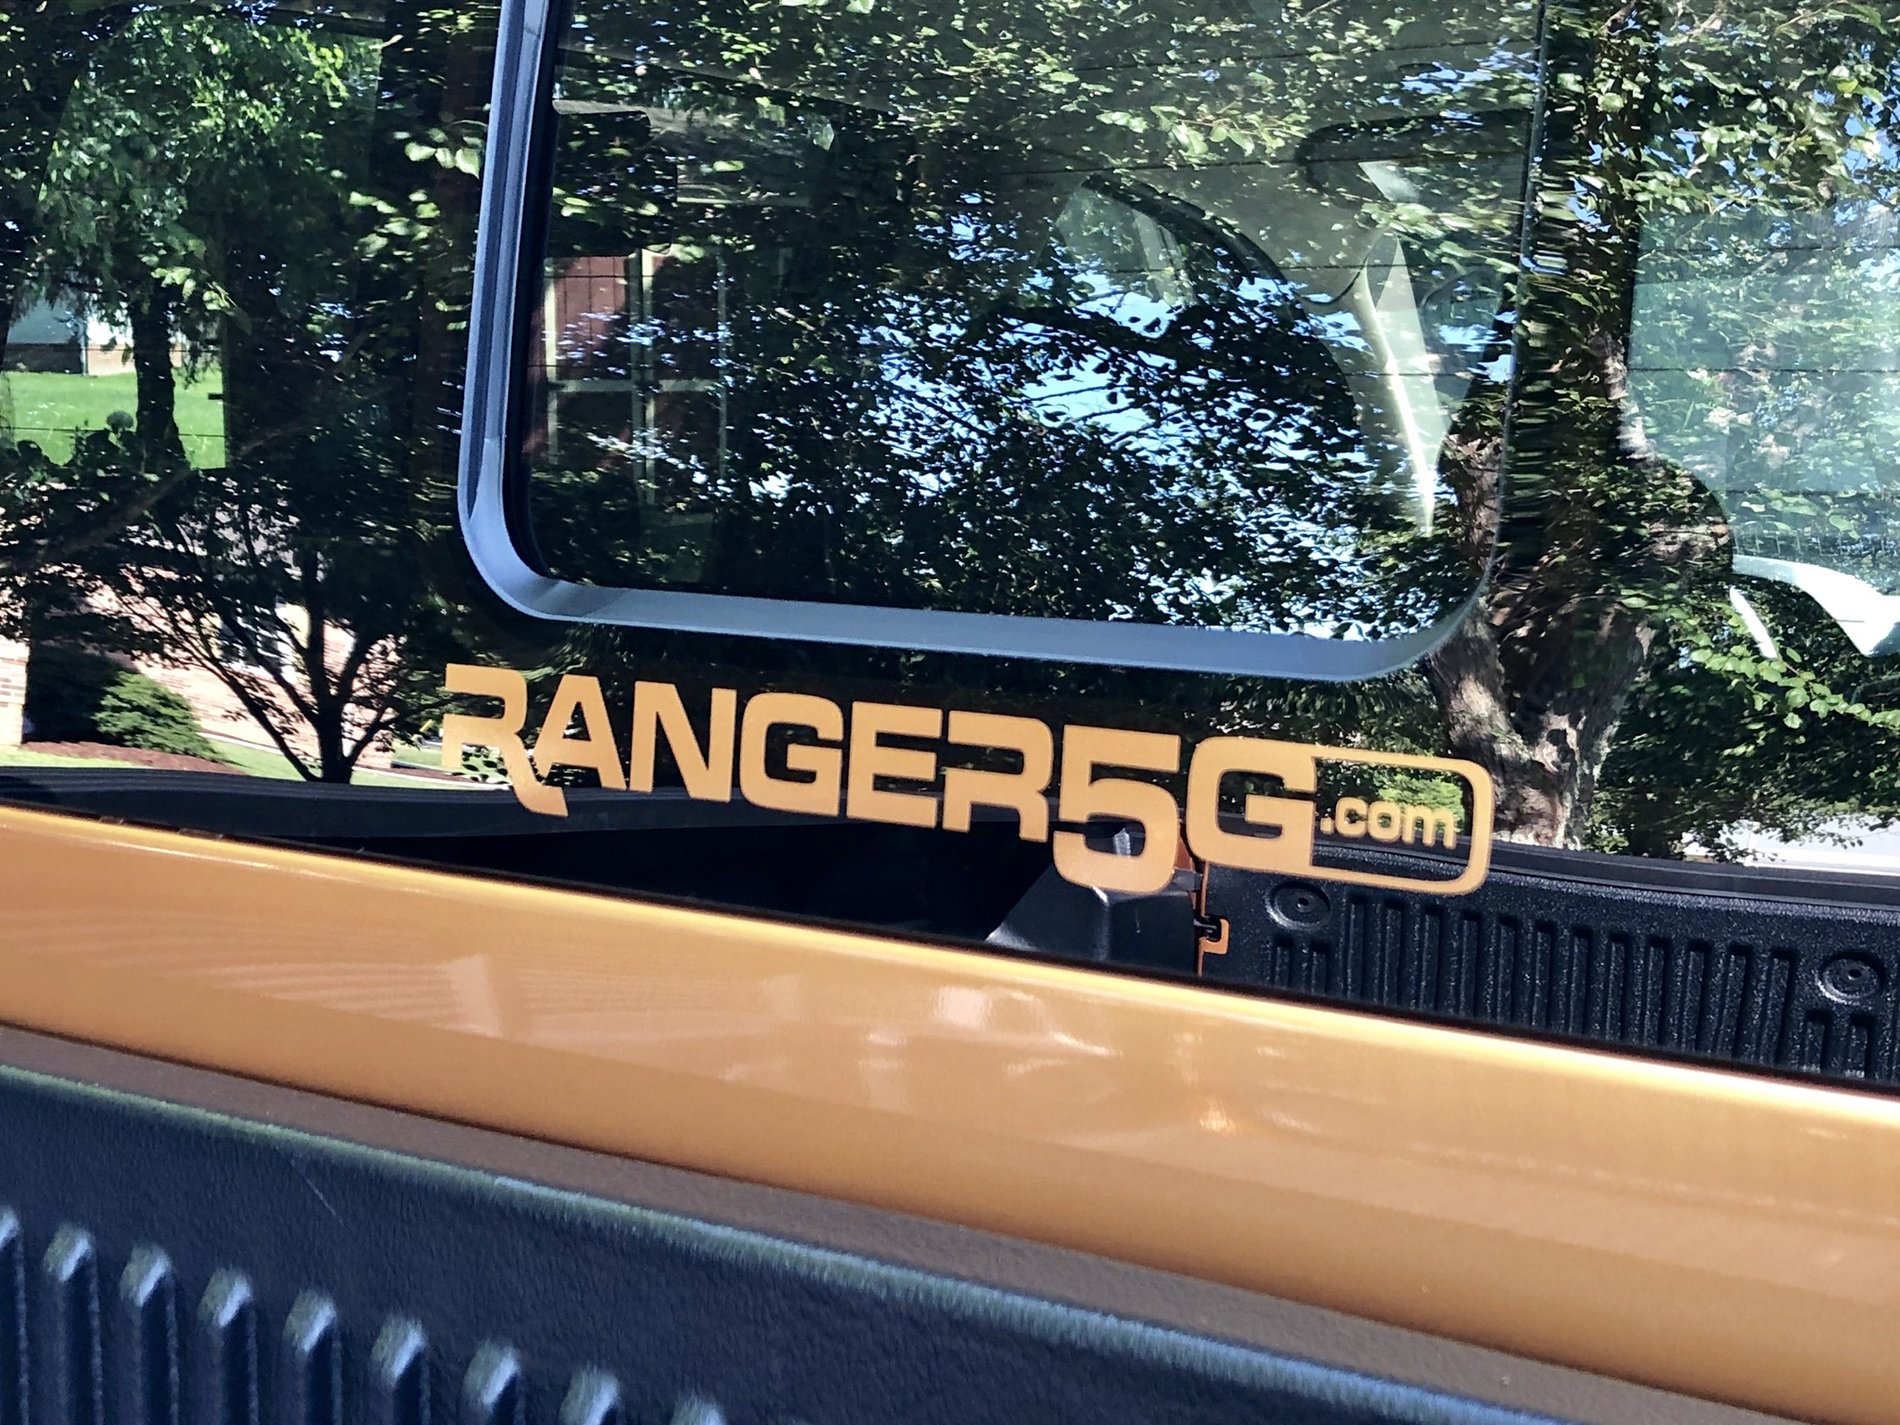 Ford Ranger Lets see those Cab window decals!! 50BF0802-E41A-4110-9A42-E3EC2E8D7A65